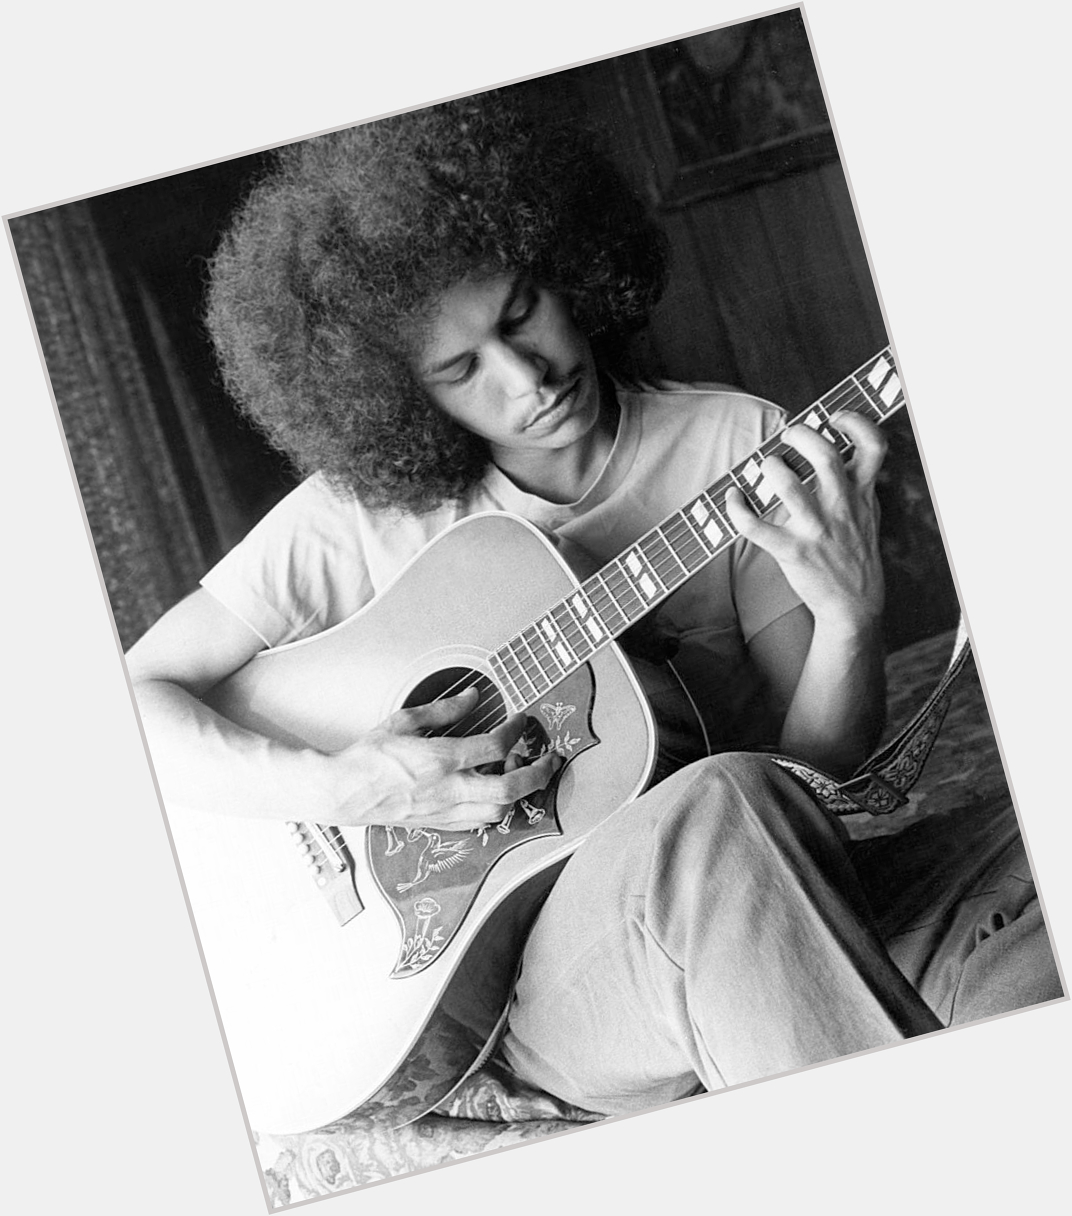 Happy Birthday to Shuggie Otis who turns 68 years young today - pictured here in Los Angeles, California, 1974 